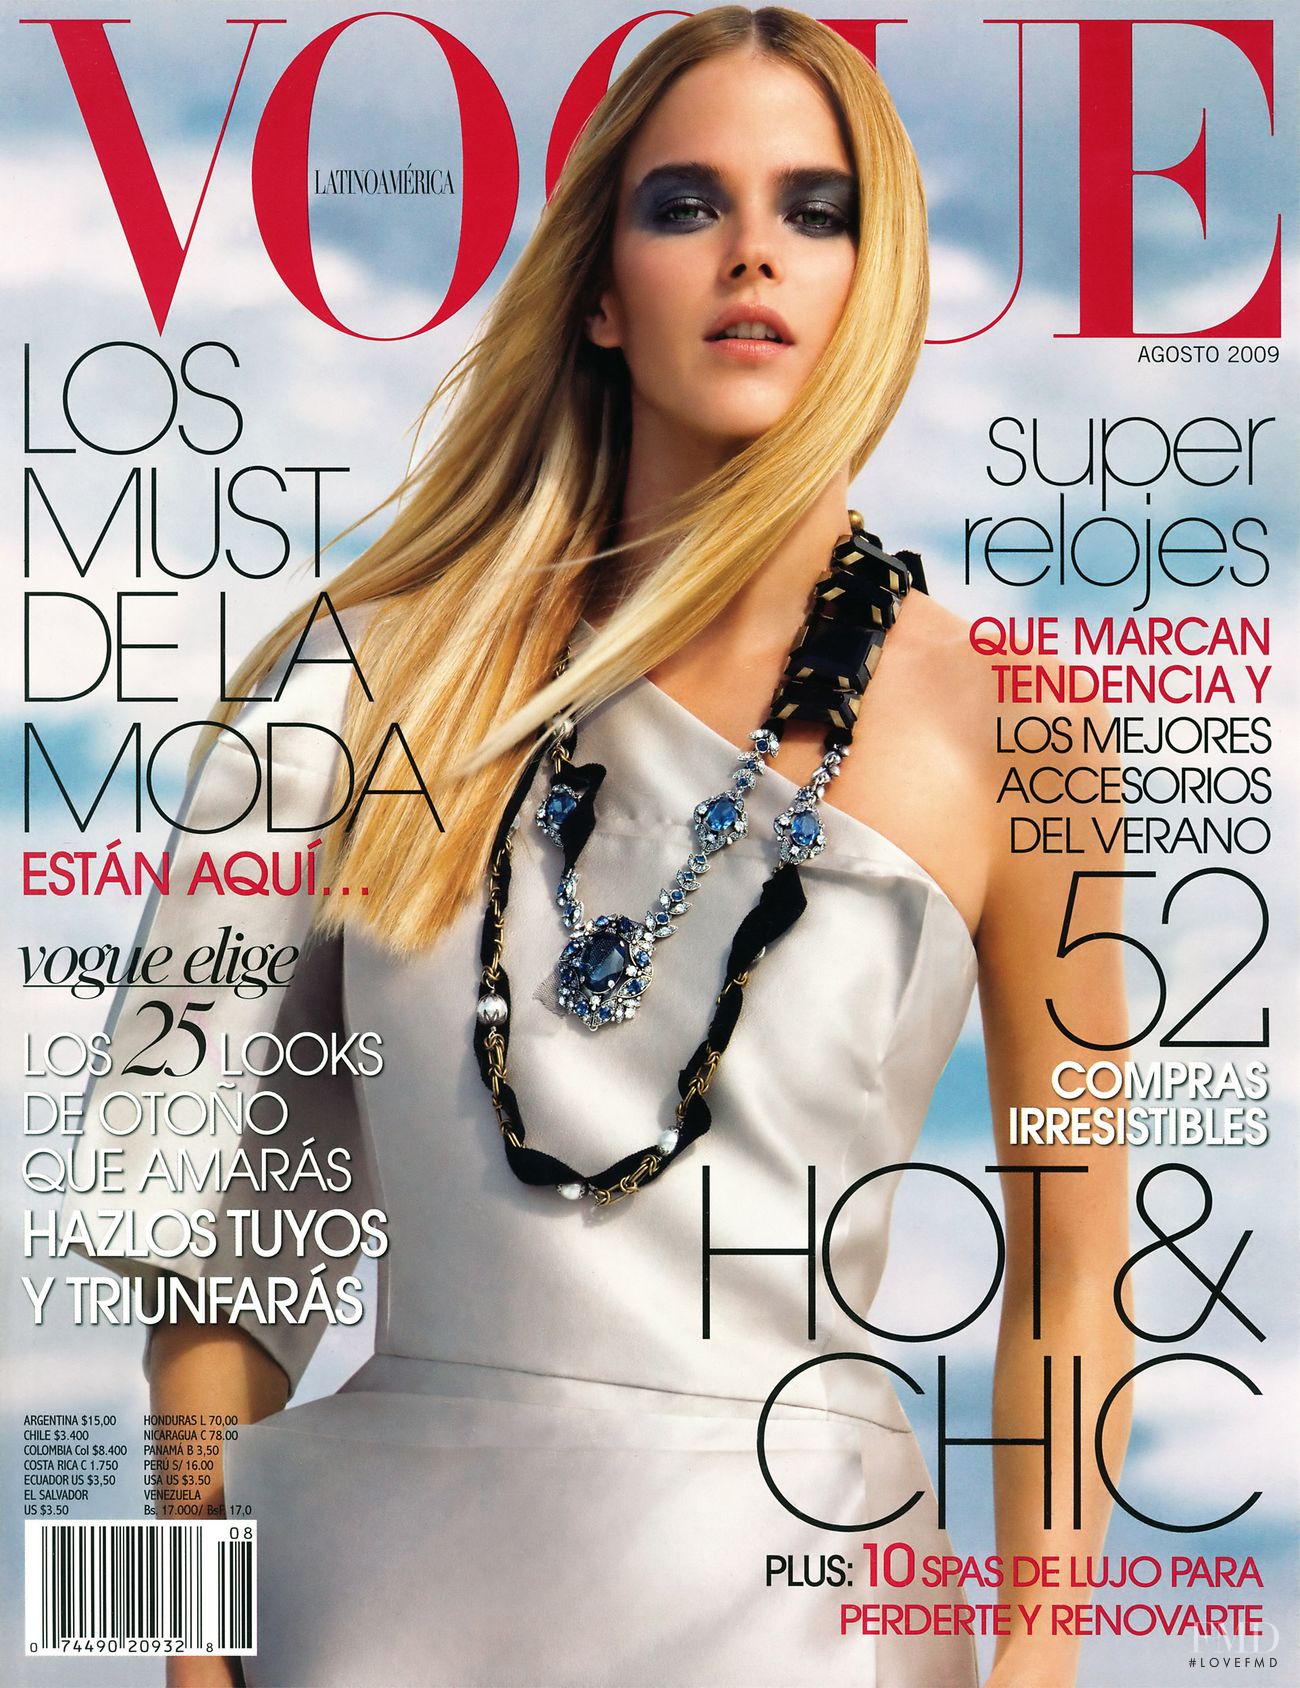 Cover of Vogue Latin America with Shannan Click, August 2009 (ID:3414 ...